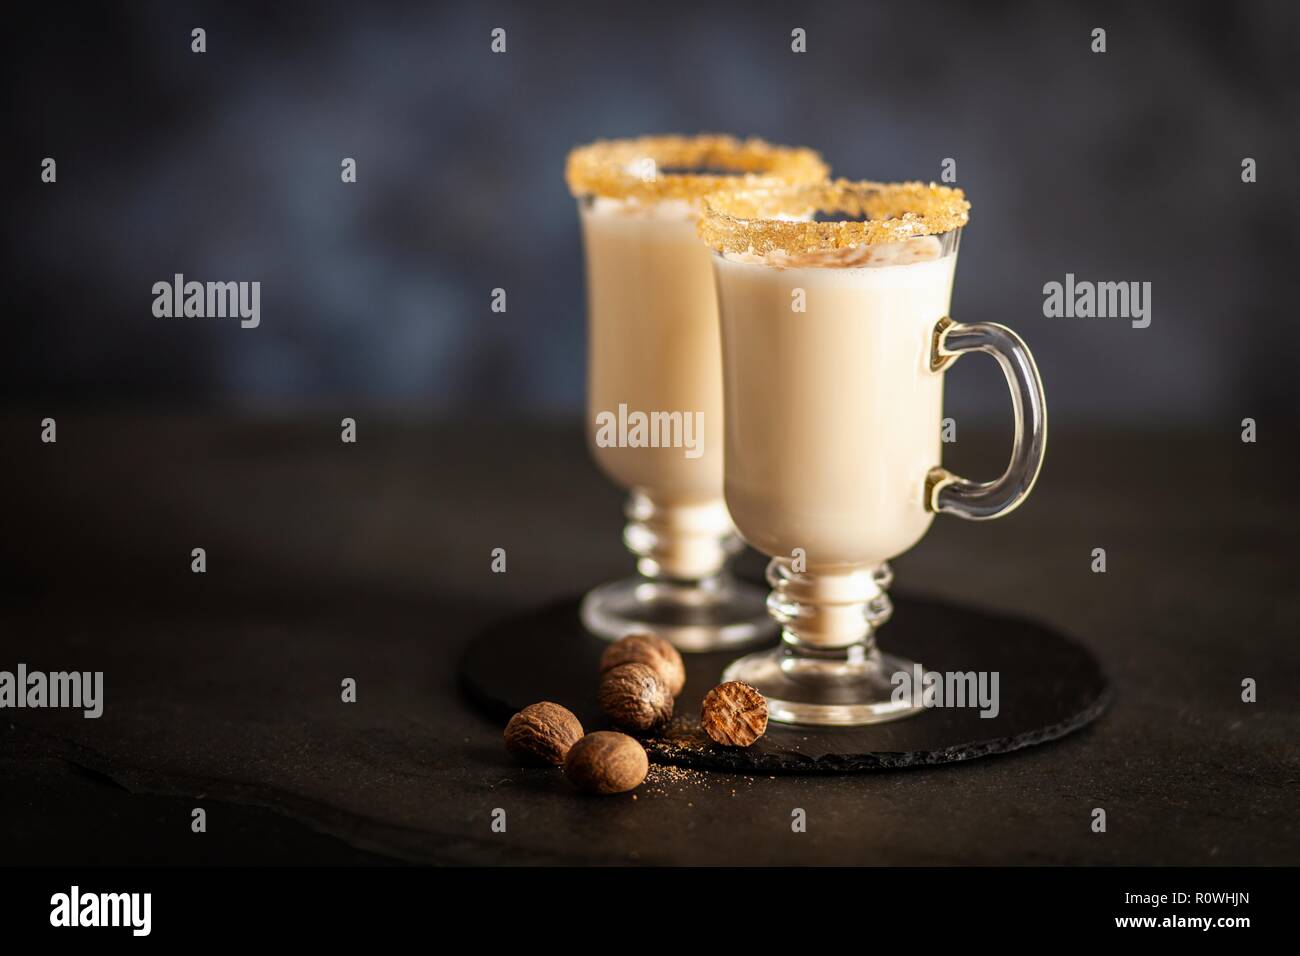 Traditional egg nog drink in glasses Stock Photo by ©urban_light